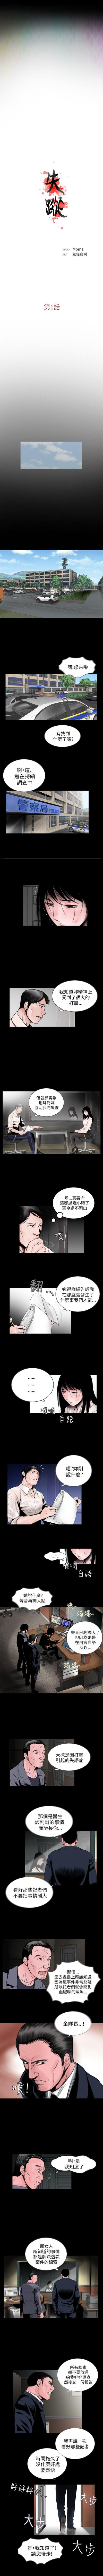 Eating 失蹤 1-28 Movie - Page 5